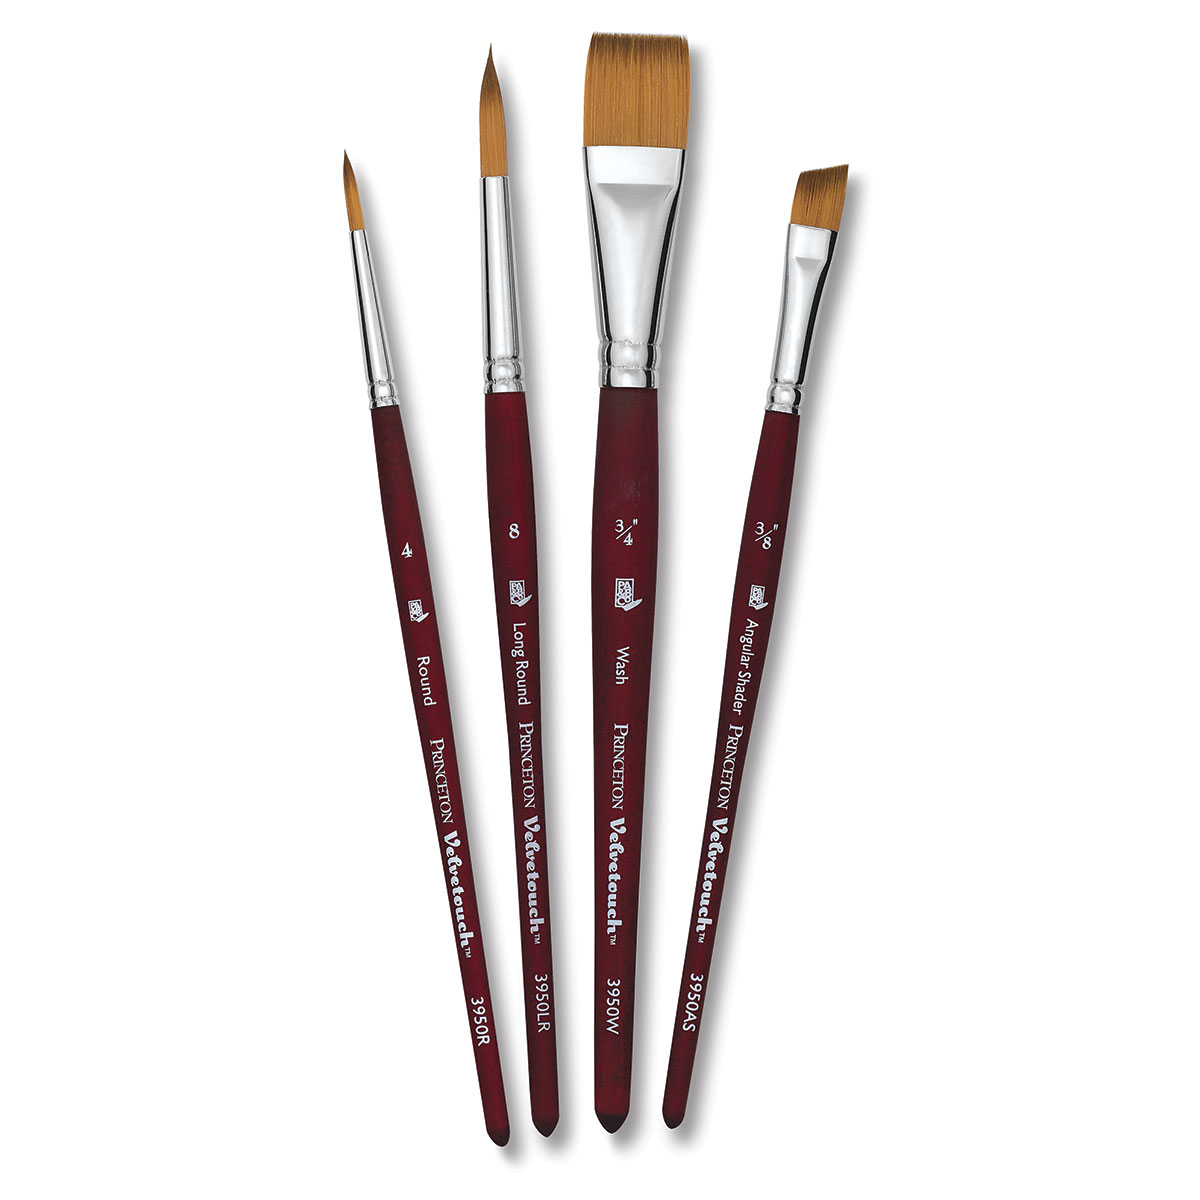 Velvetouch Fan Series by Princeton Brush - Brushes and More